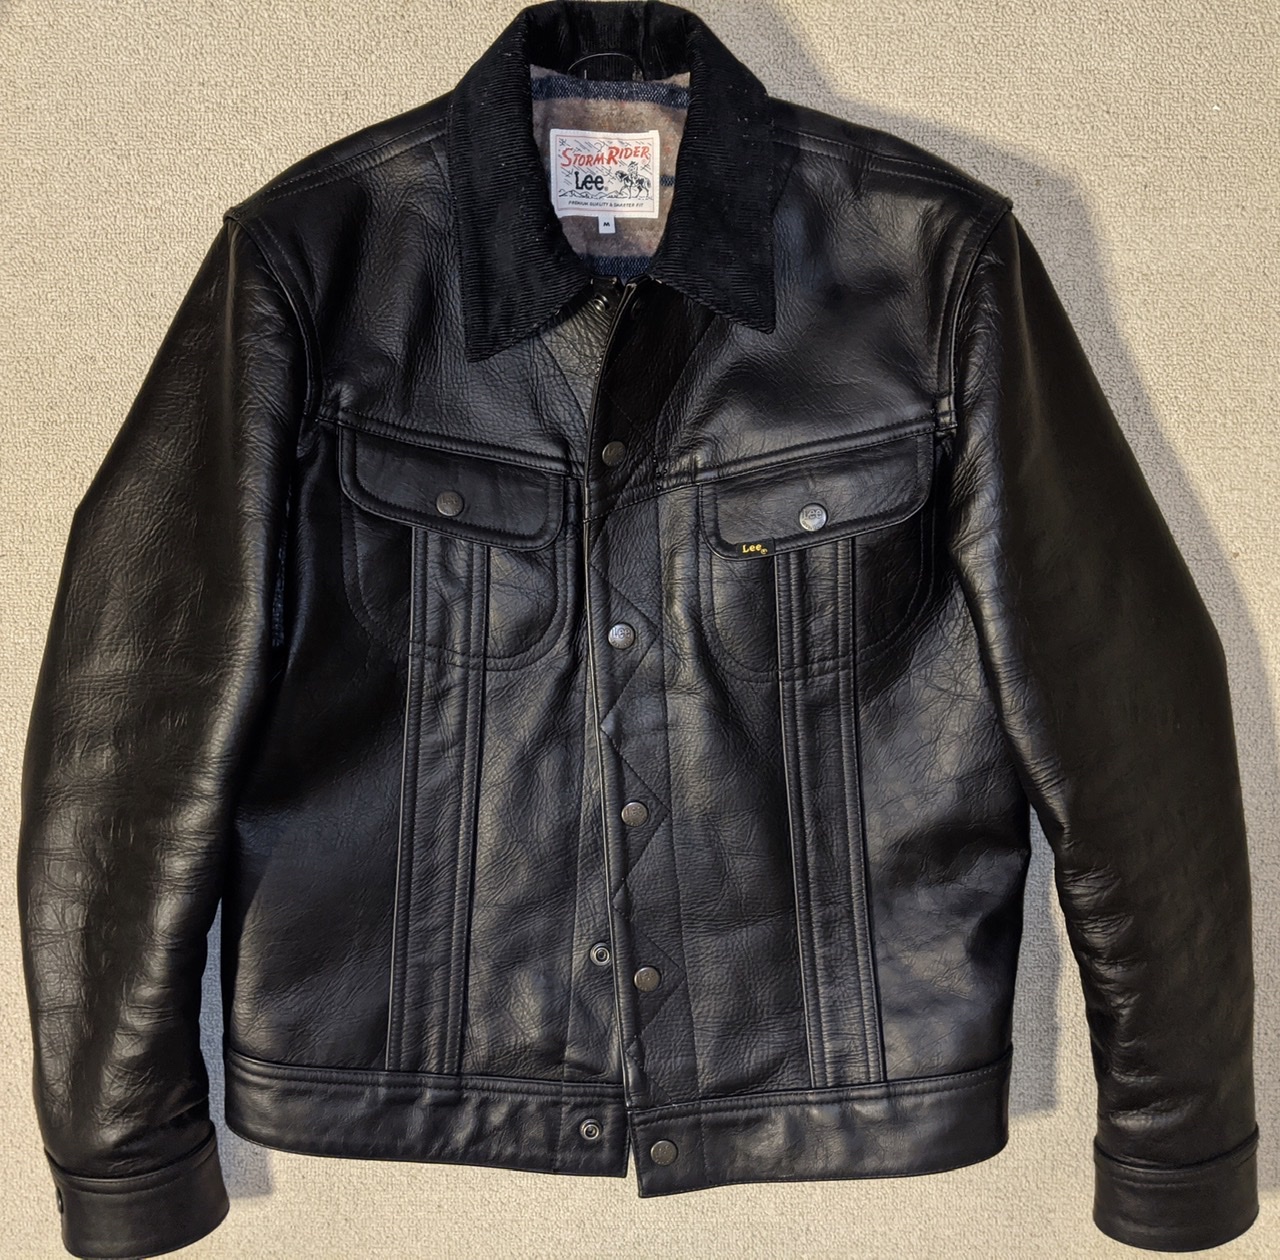 Lee101 Storm Rider Cowhide Jacket | Page 2 | The Fedora Lounge